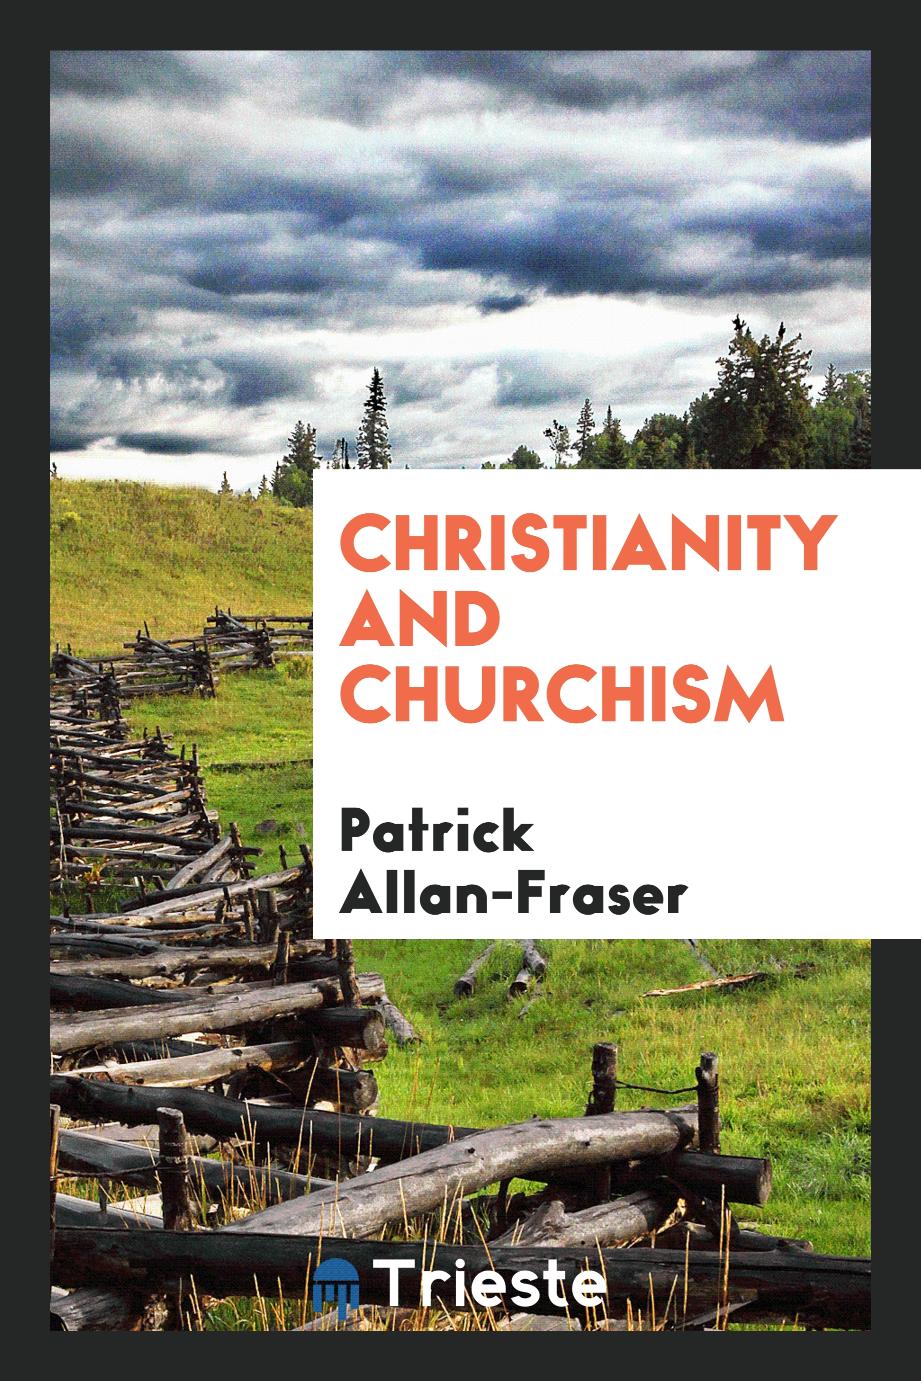 Christianity and Churchism